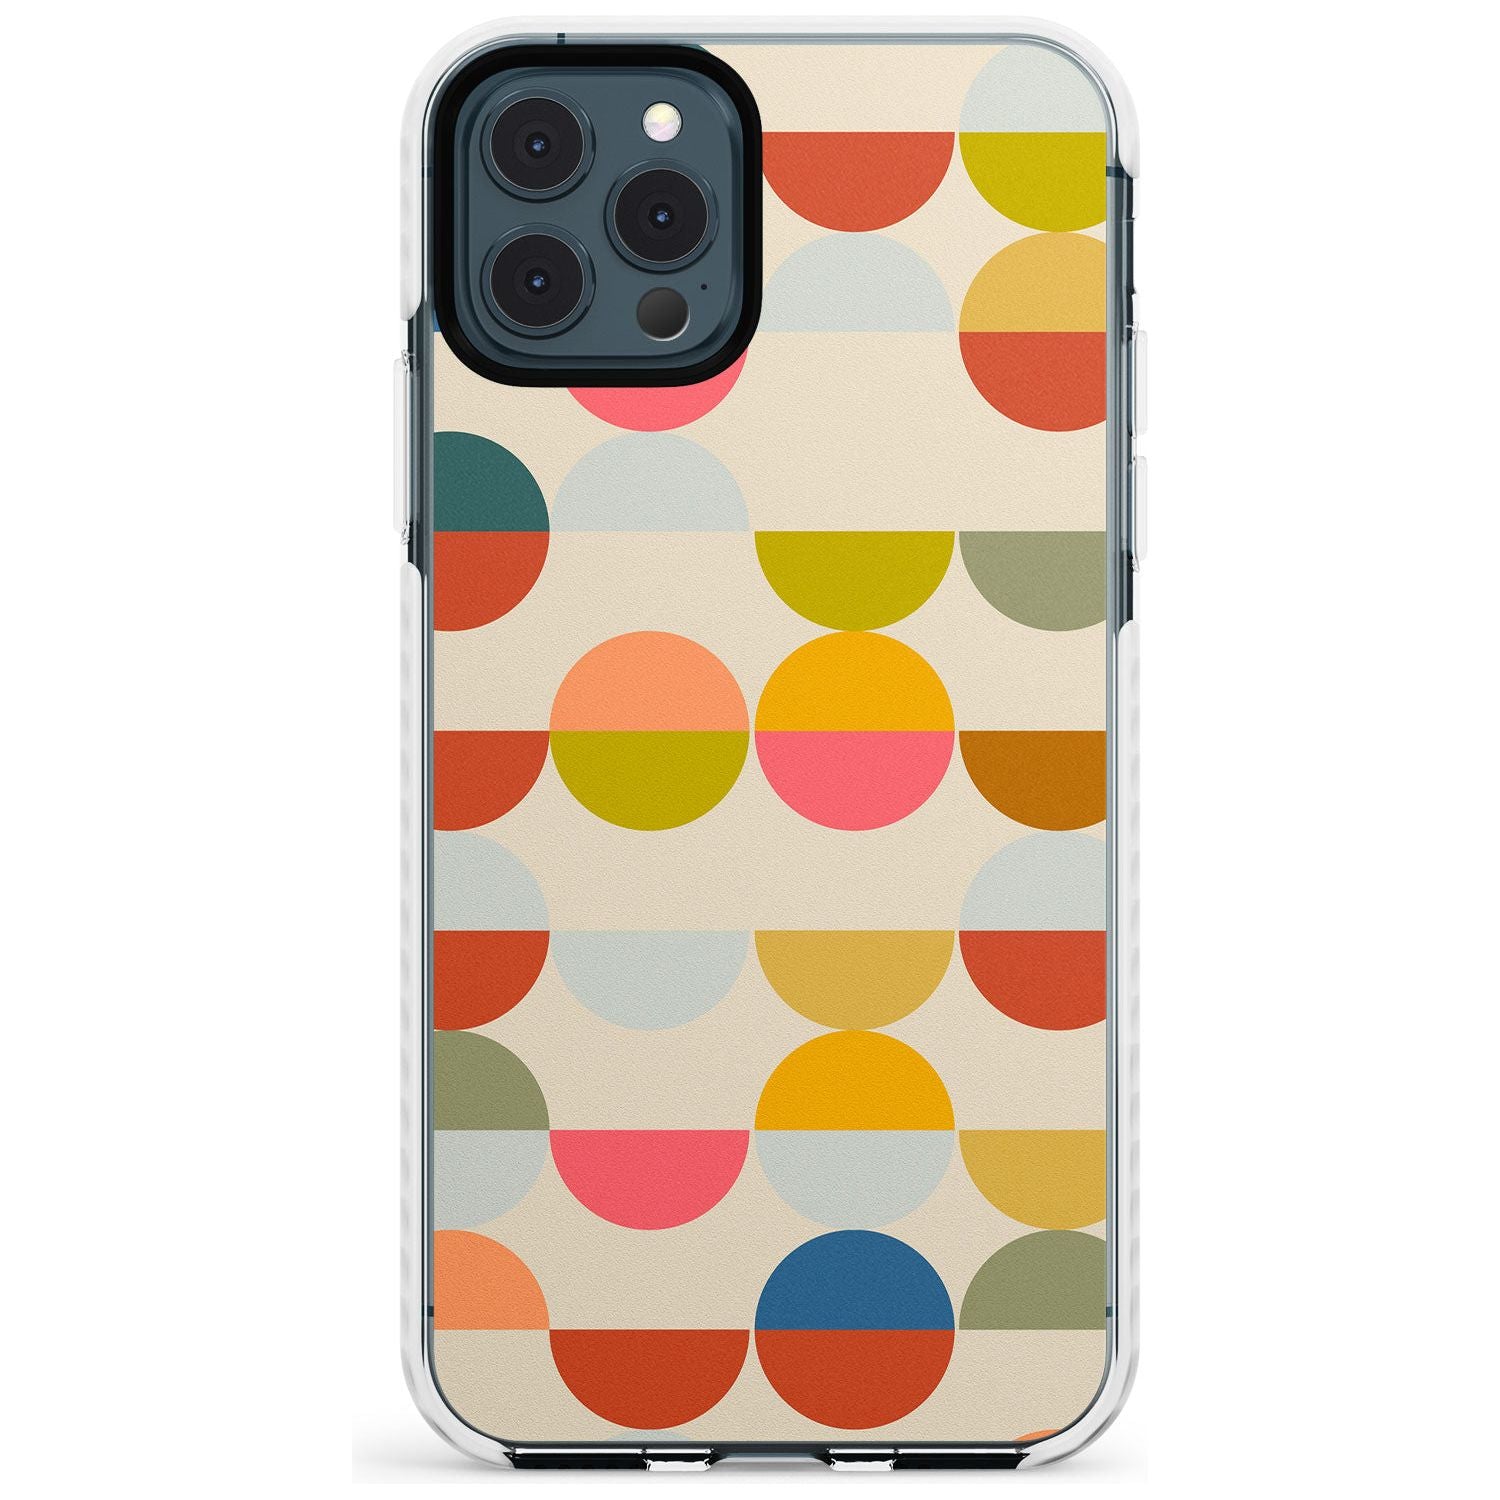 Abstract Retro Shapes: Colourful Circles Slim TPU Phone Case for iPhone 11 Pro Max